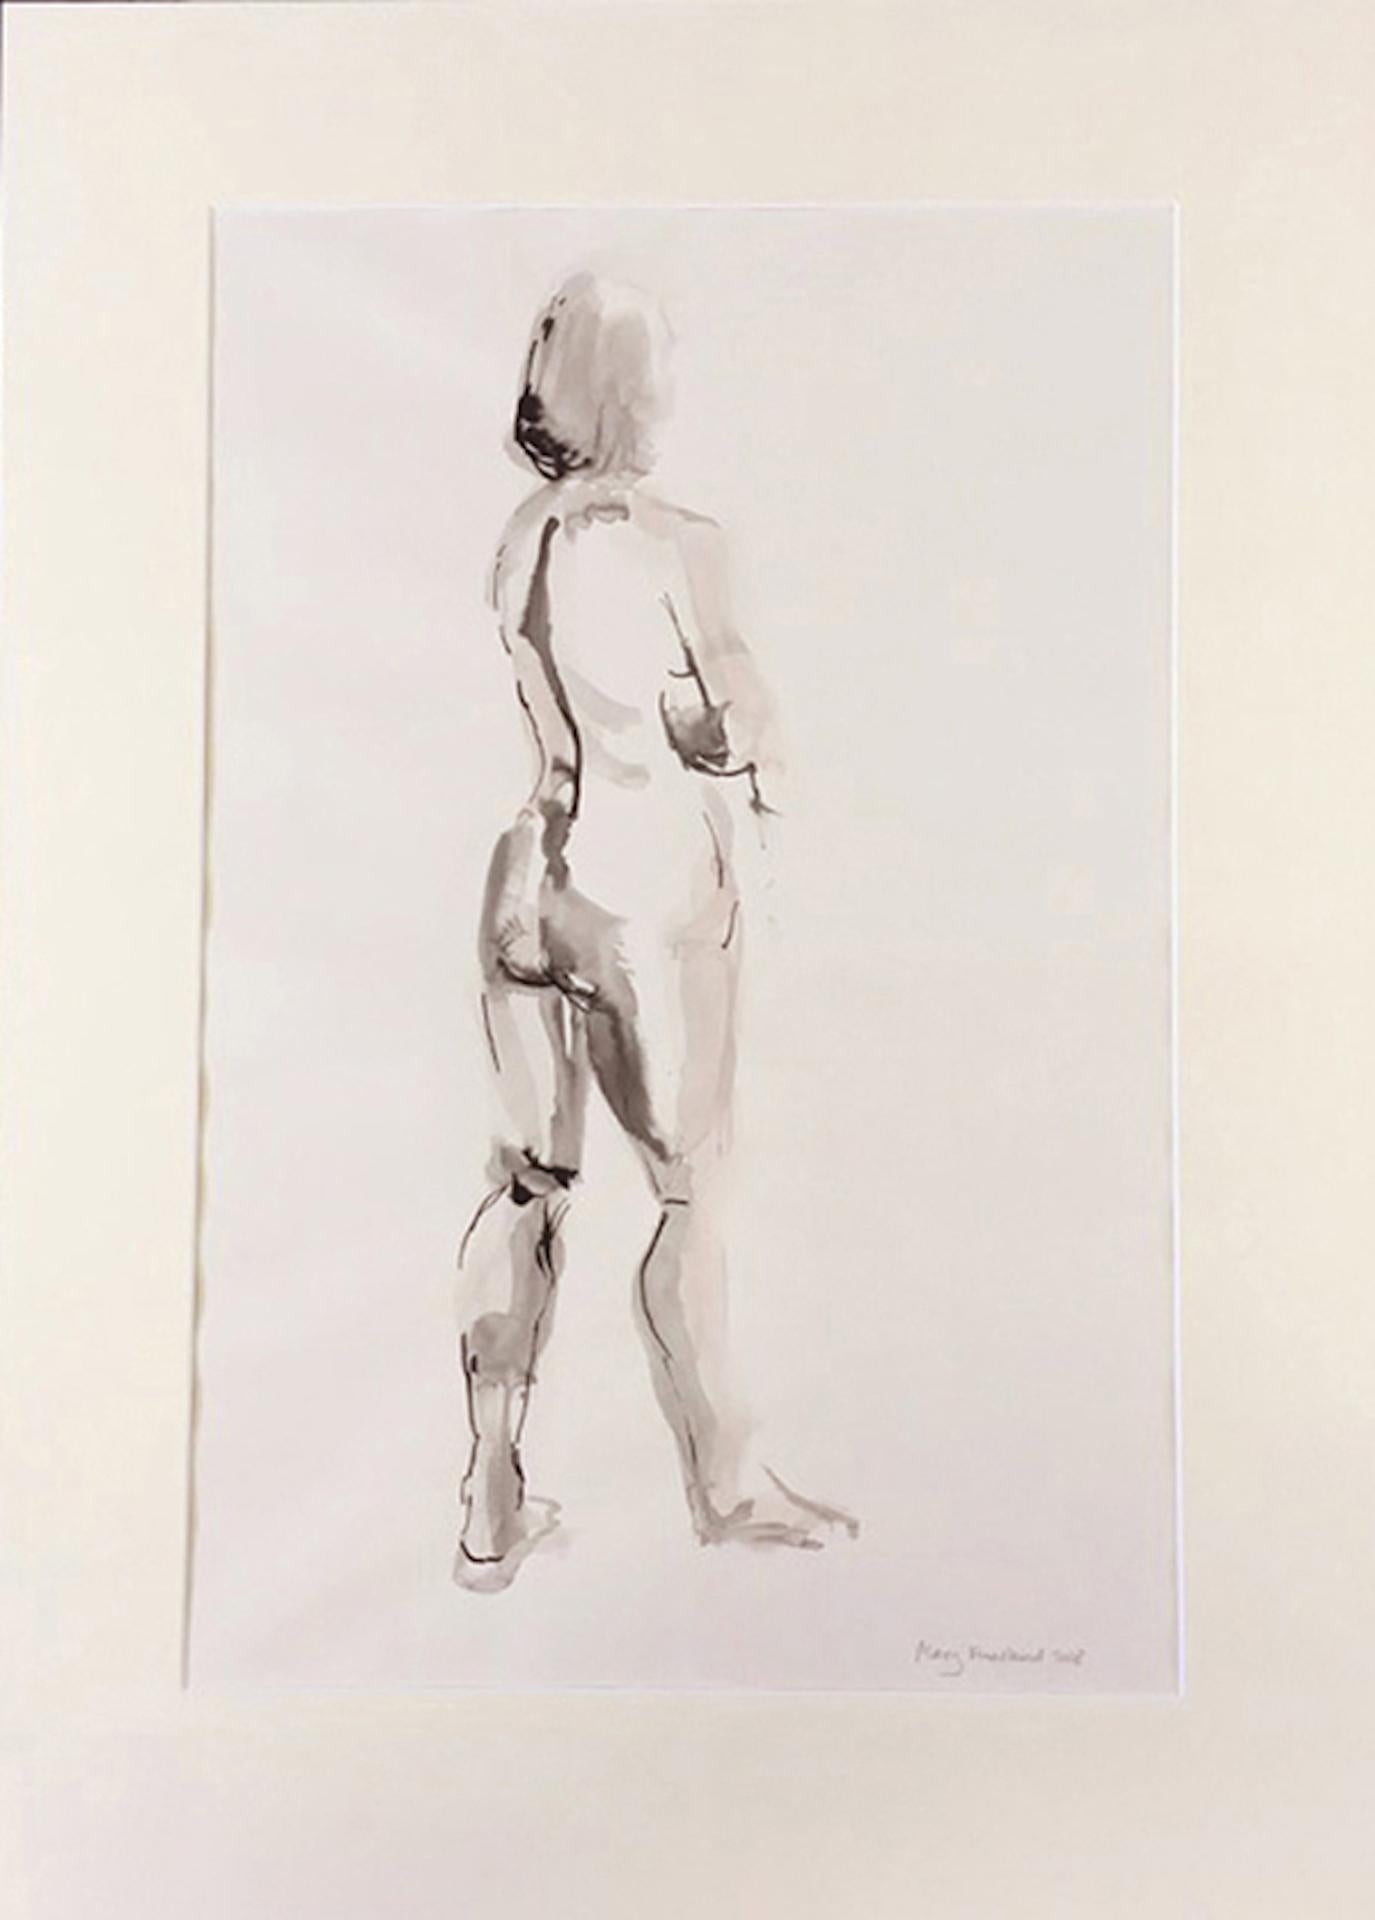 Mary Knowland
Looking Over
Original Nude Drawing
Willow Stick and Ink Wash on Paper
Image Size: H 55cm x W 36.5cm
Mounted Size: H 72.5cm x W 52cm x D 0.5cm
Sold Unframed
Please note that insitu images are purely an indication of how a piece may